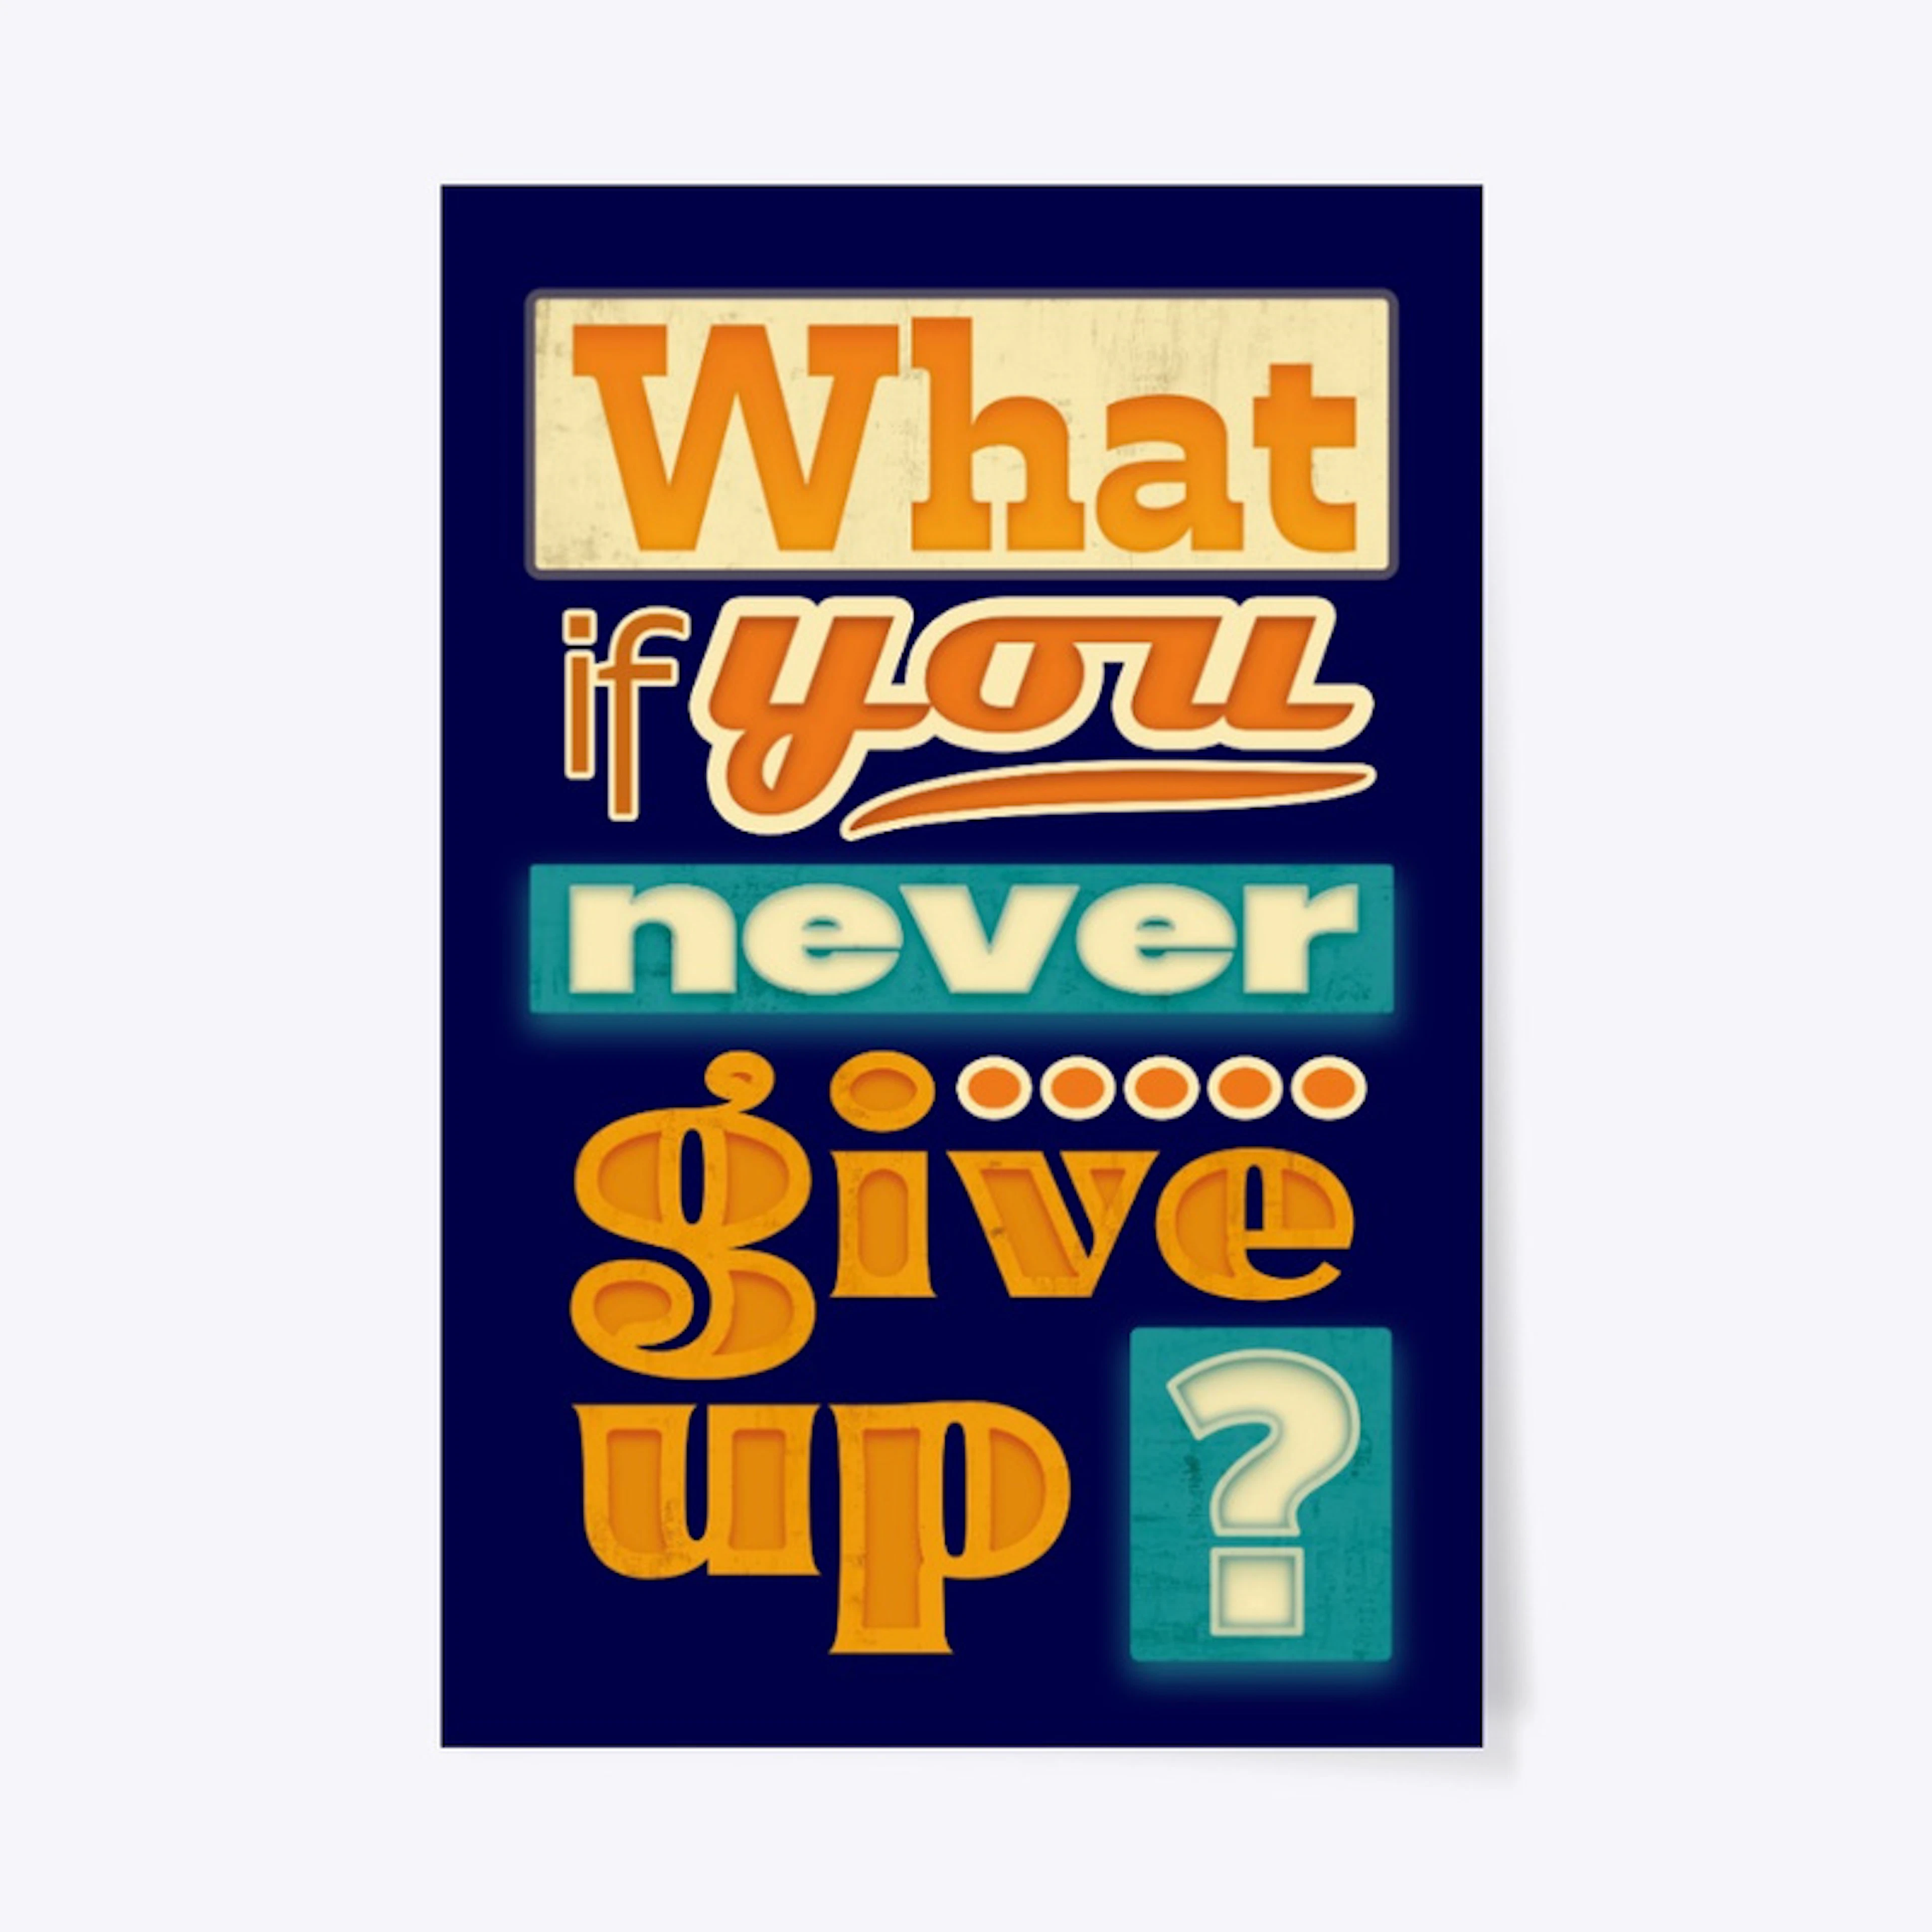 What if you never give up ?